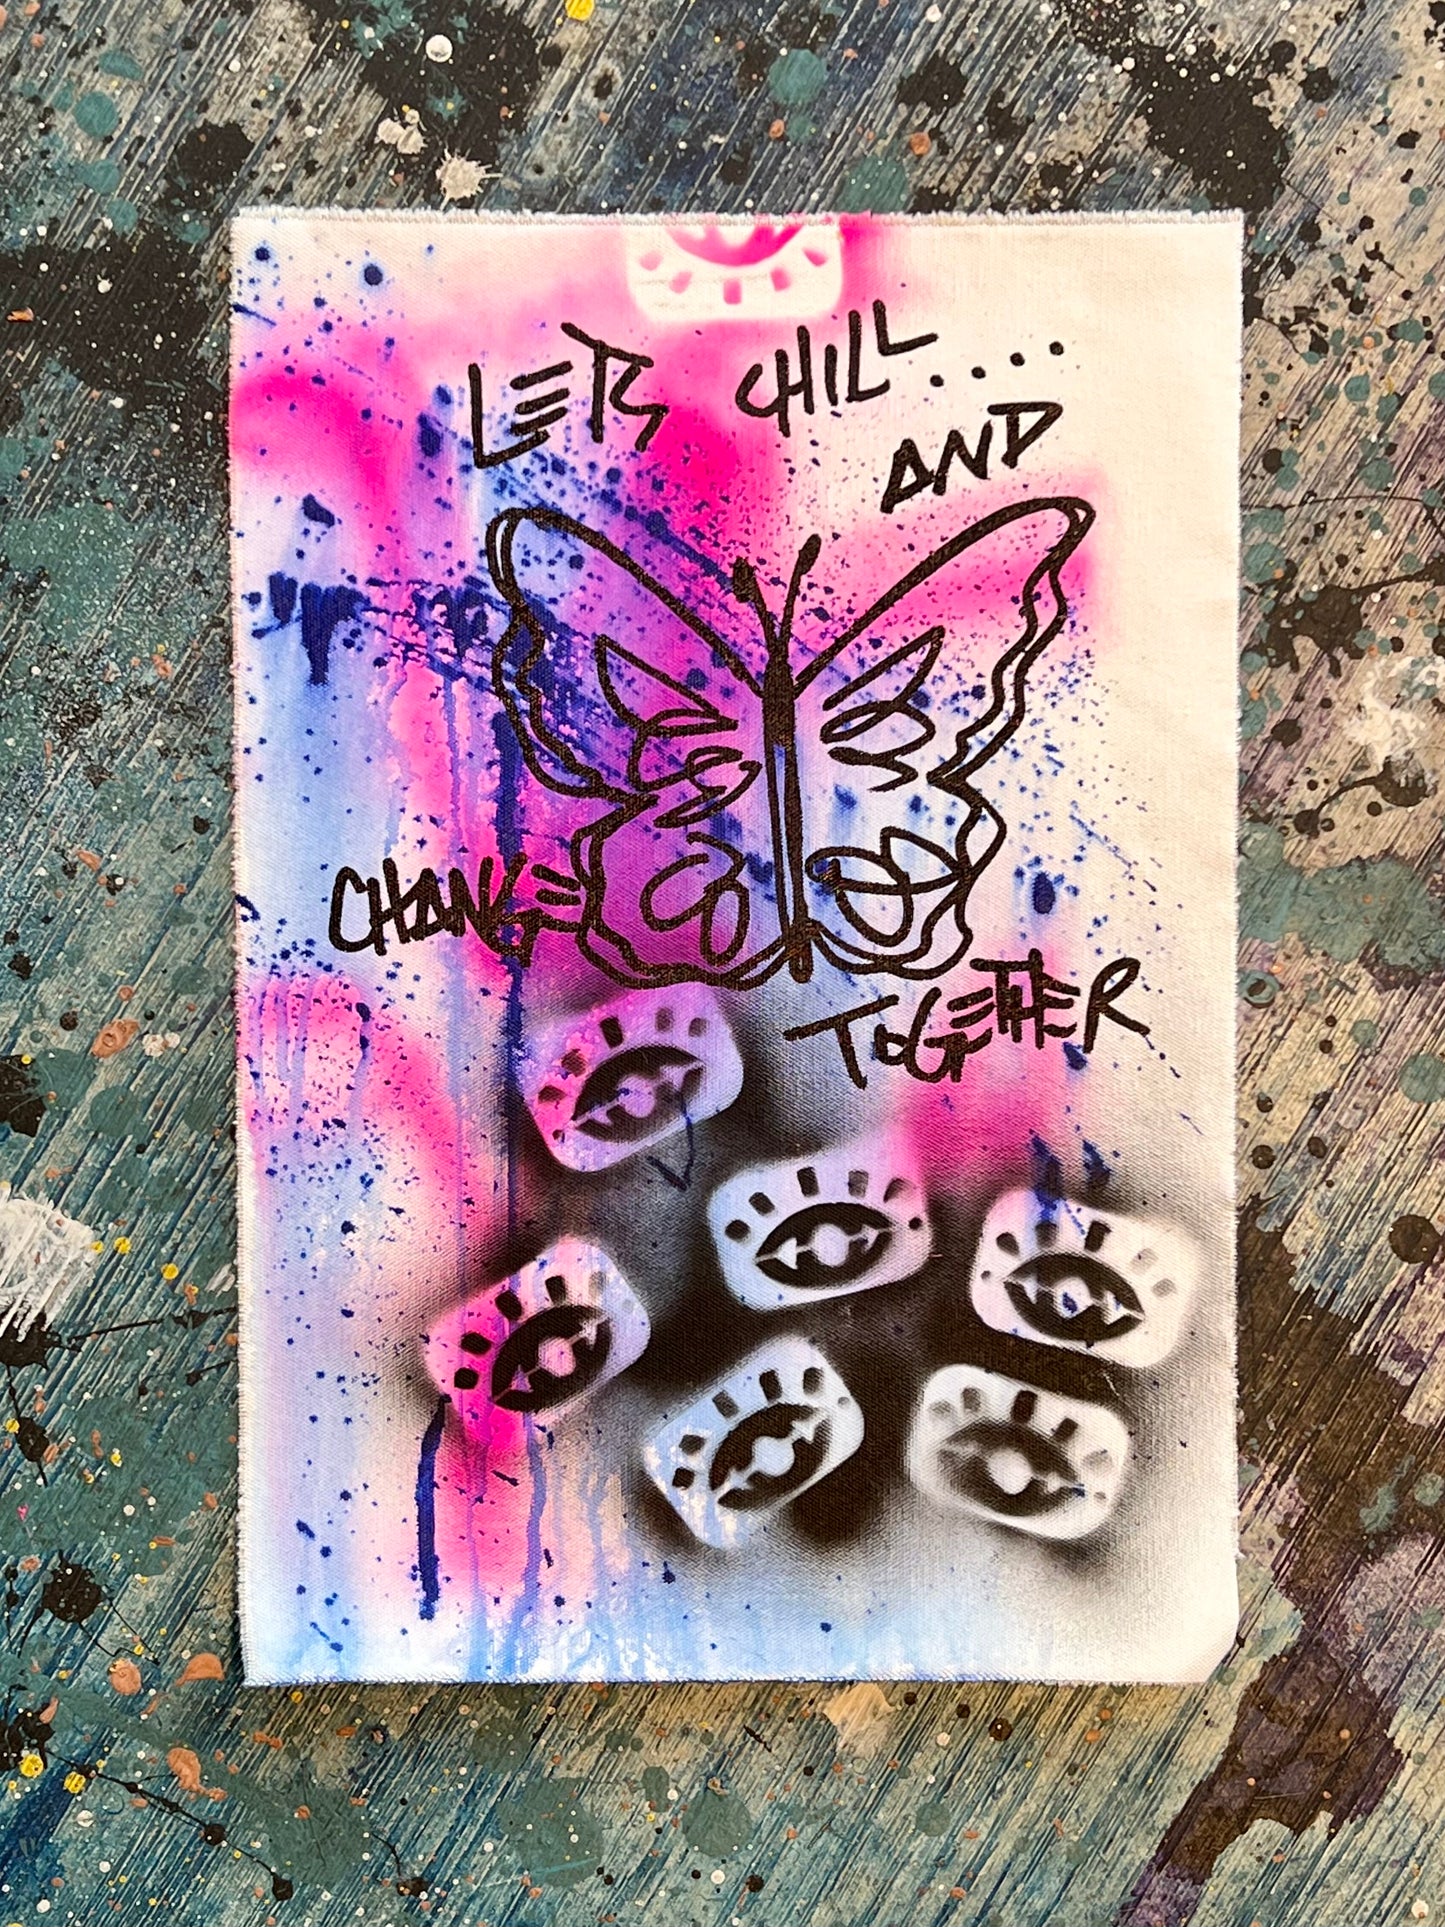 Chill and change together / butterfly mantra / August 2023